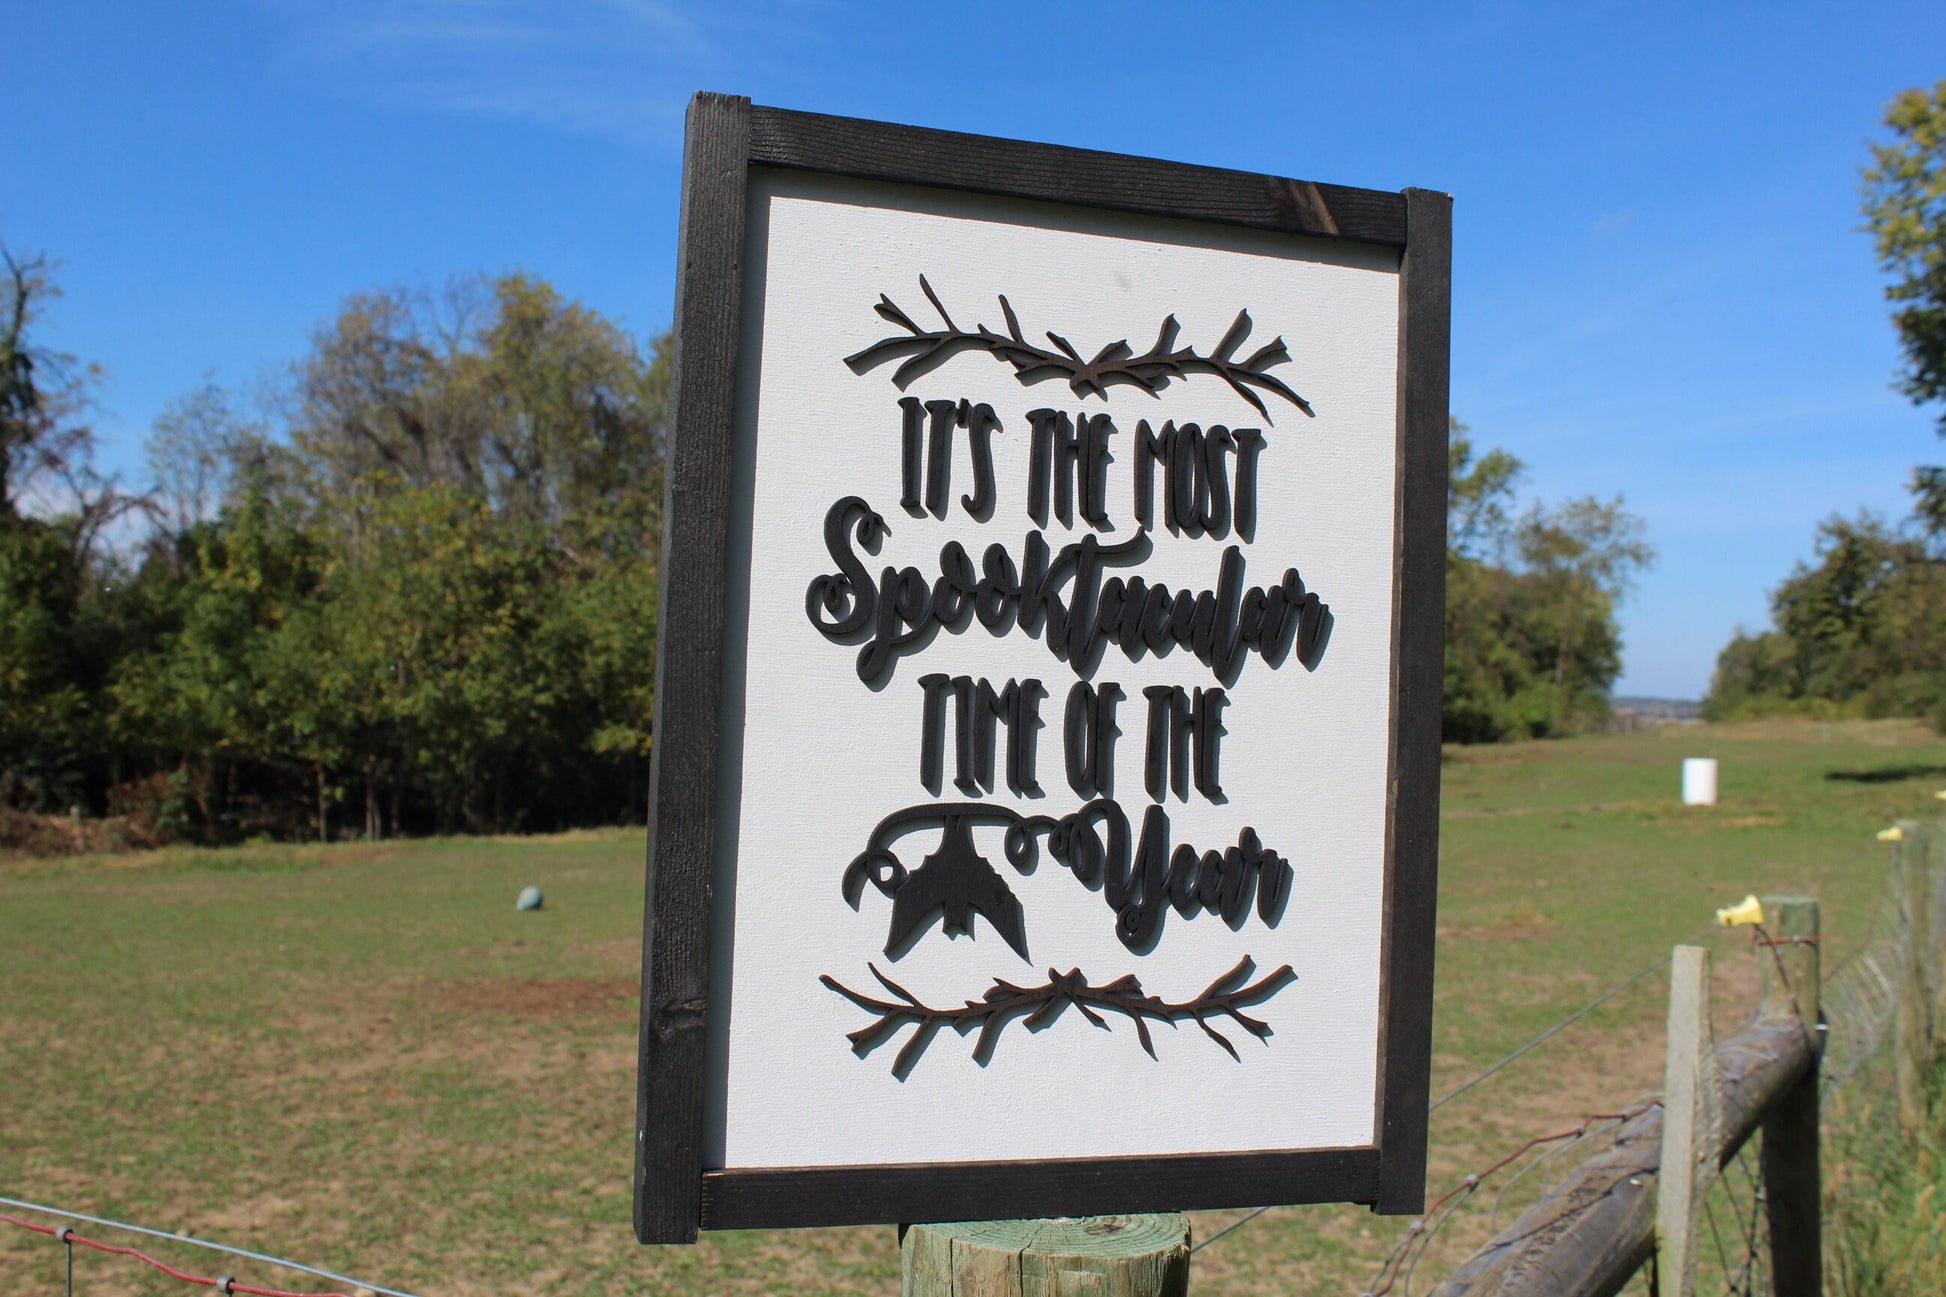 Halloween Spooky Season Spooktacular Sign Time Year Black and White Sticks Bats Chic Cursive Words Sayings Framed 3D Lettering Sticks Wood